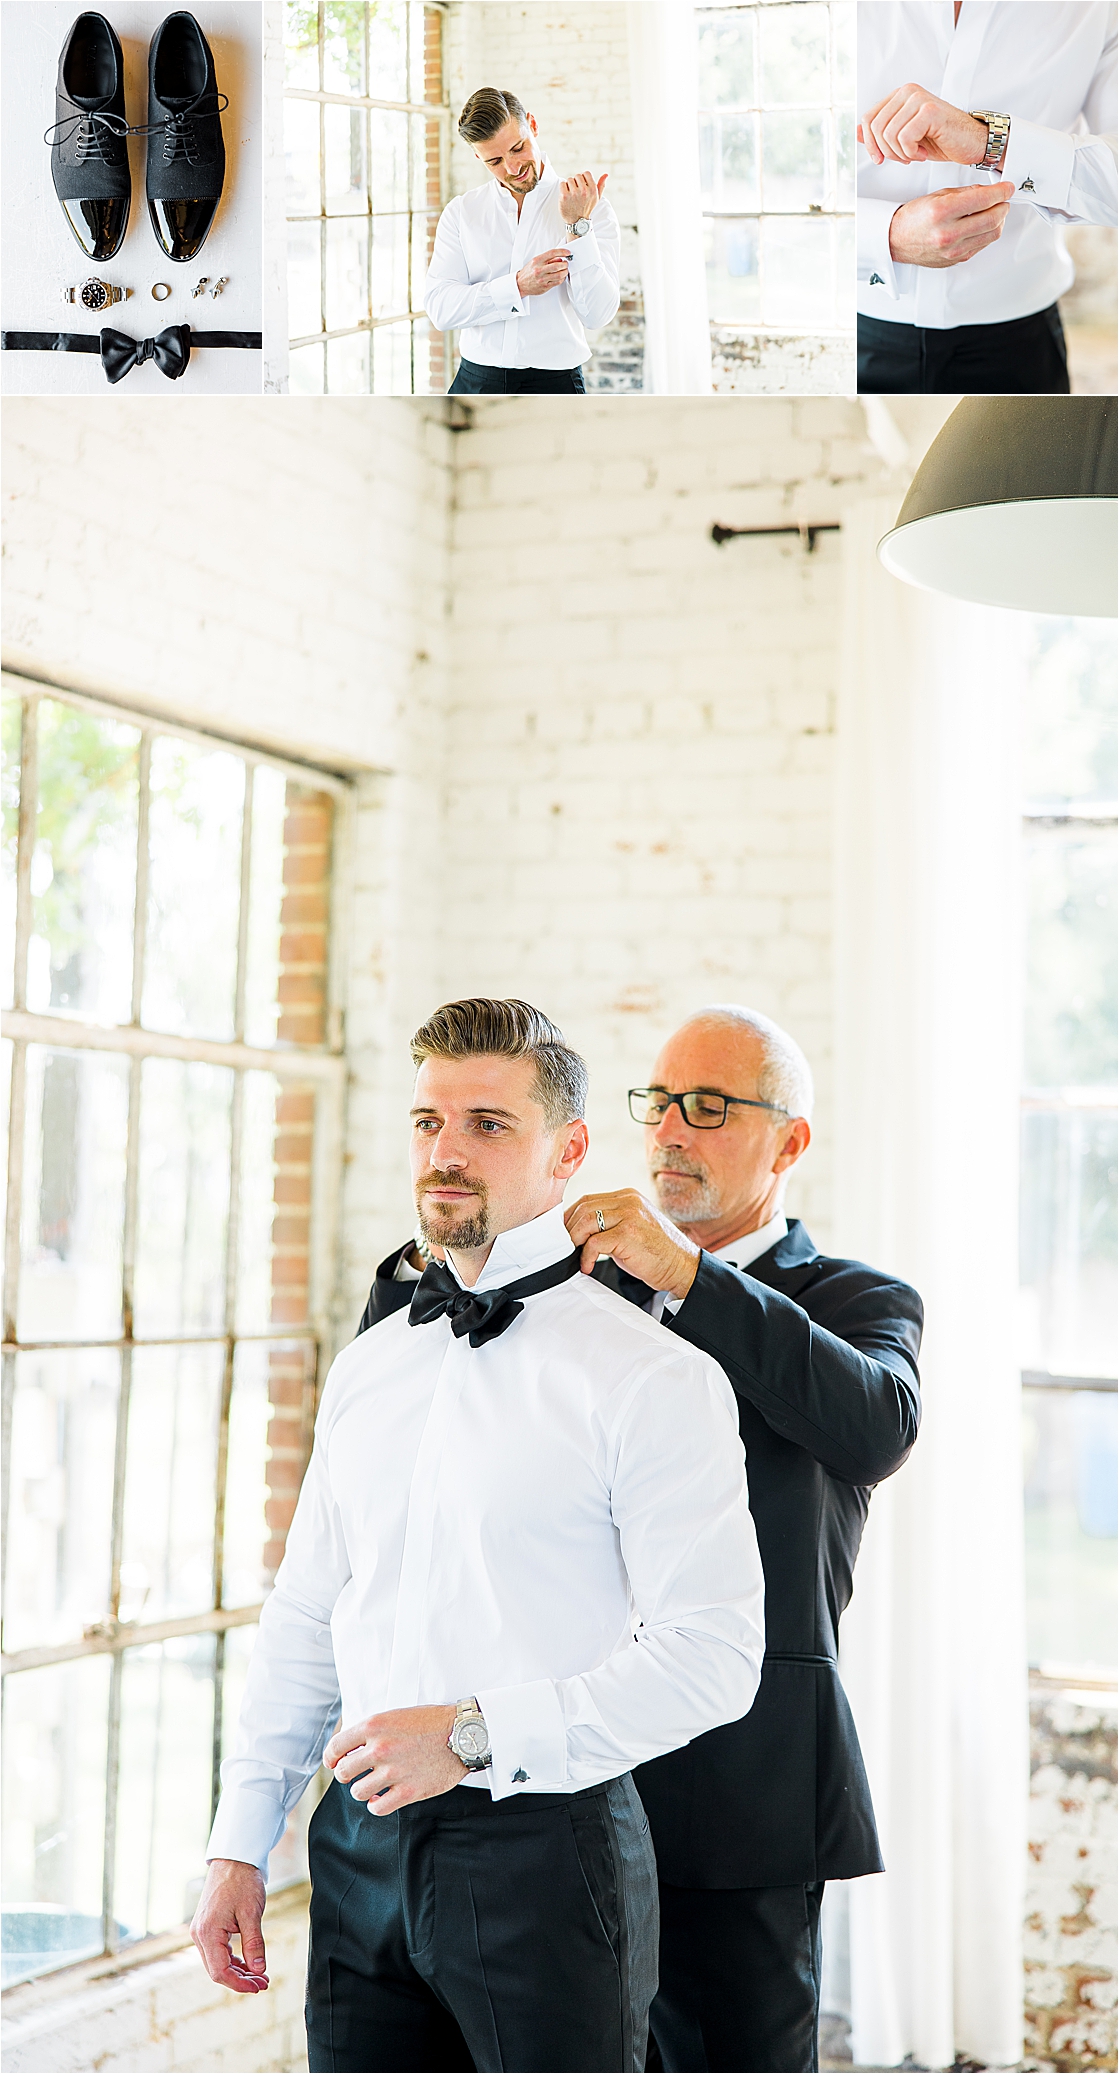 The groom's details and his father helping him to get dressed on his wedding day at Hickory Street Annex by Dallas Wedding Photographer Jilian Hogan 